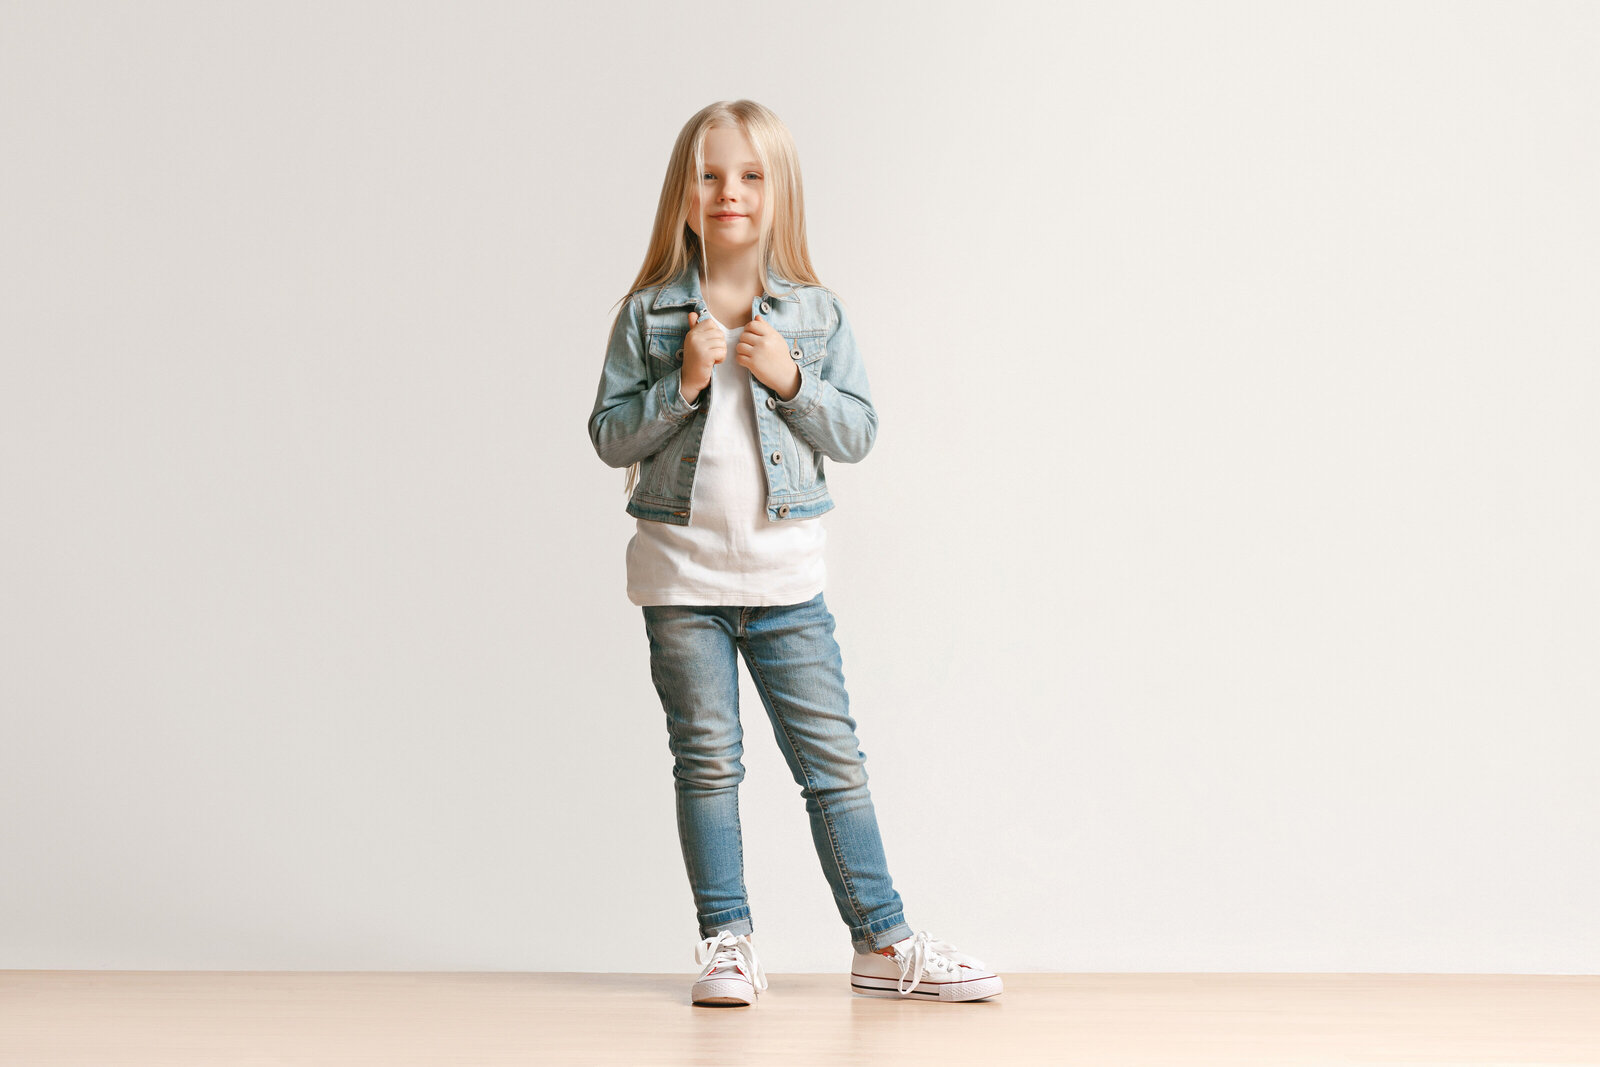 full-length-portrait-cute-little-kid-girl-stylish-jeans-clothes-looking-camera-smiling-standing-against-white-studio-wall-kids-fashion-concept